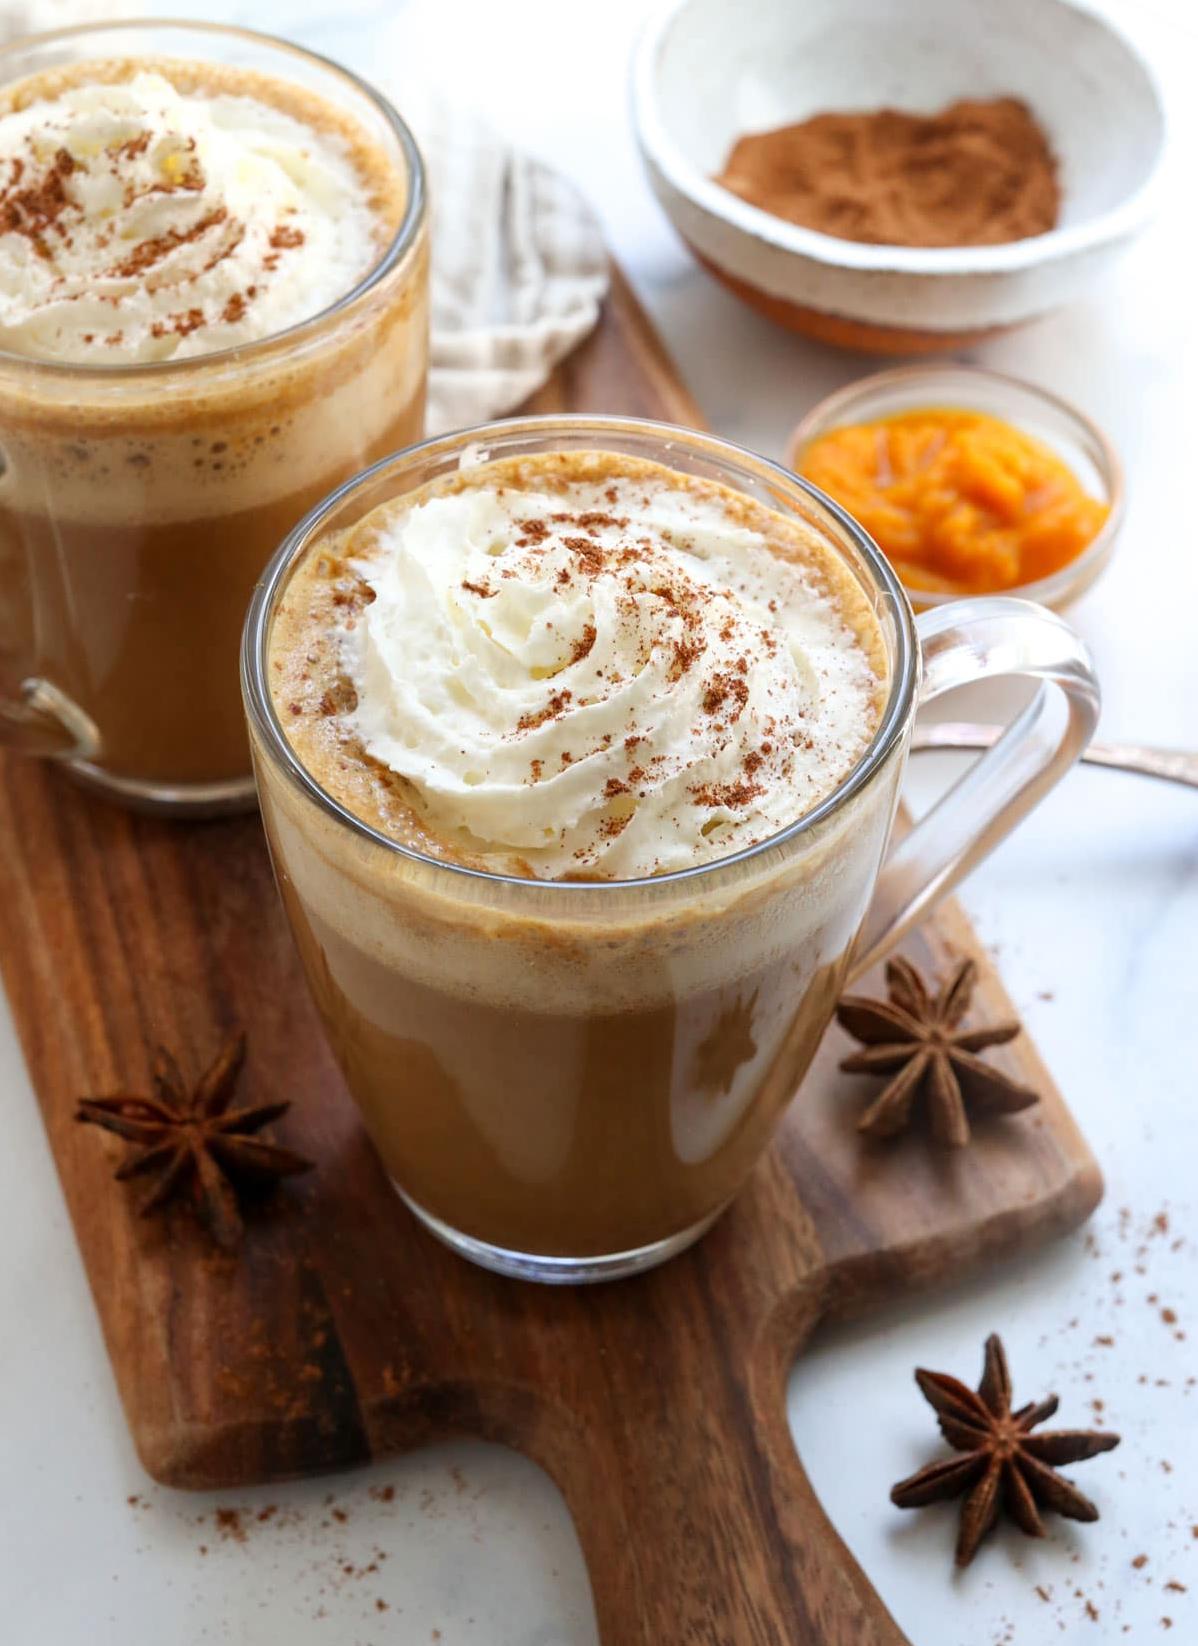  One sip of this fall-inspired beverage will transport you to a pumpkin patch